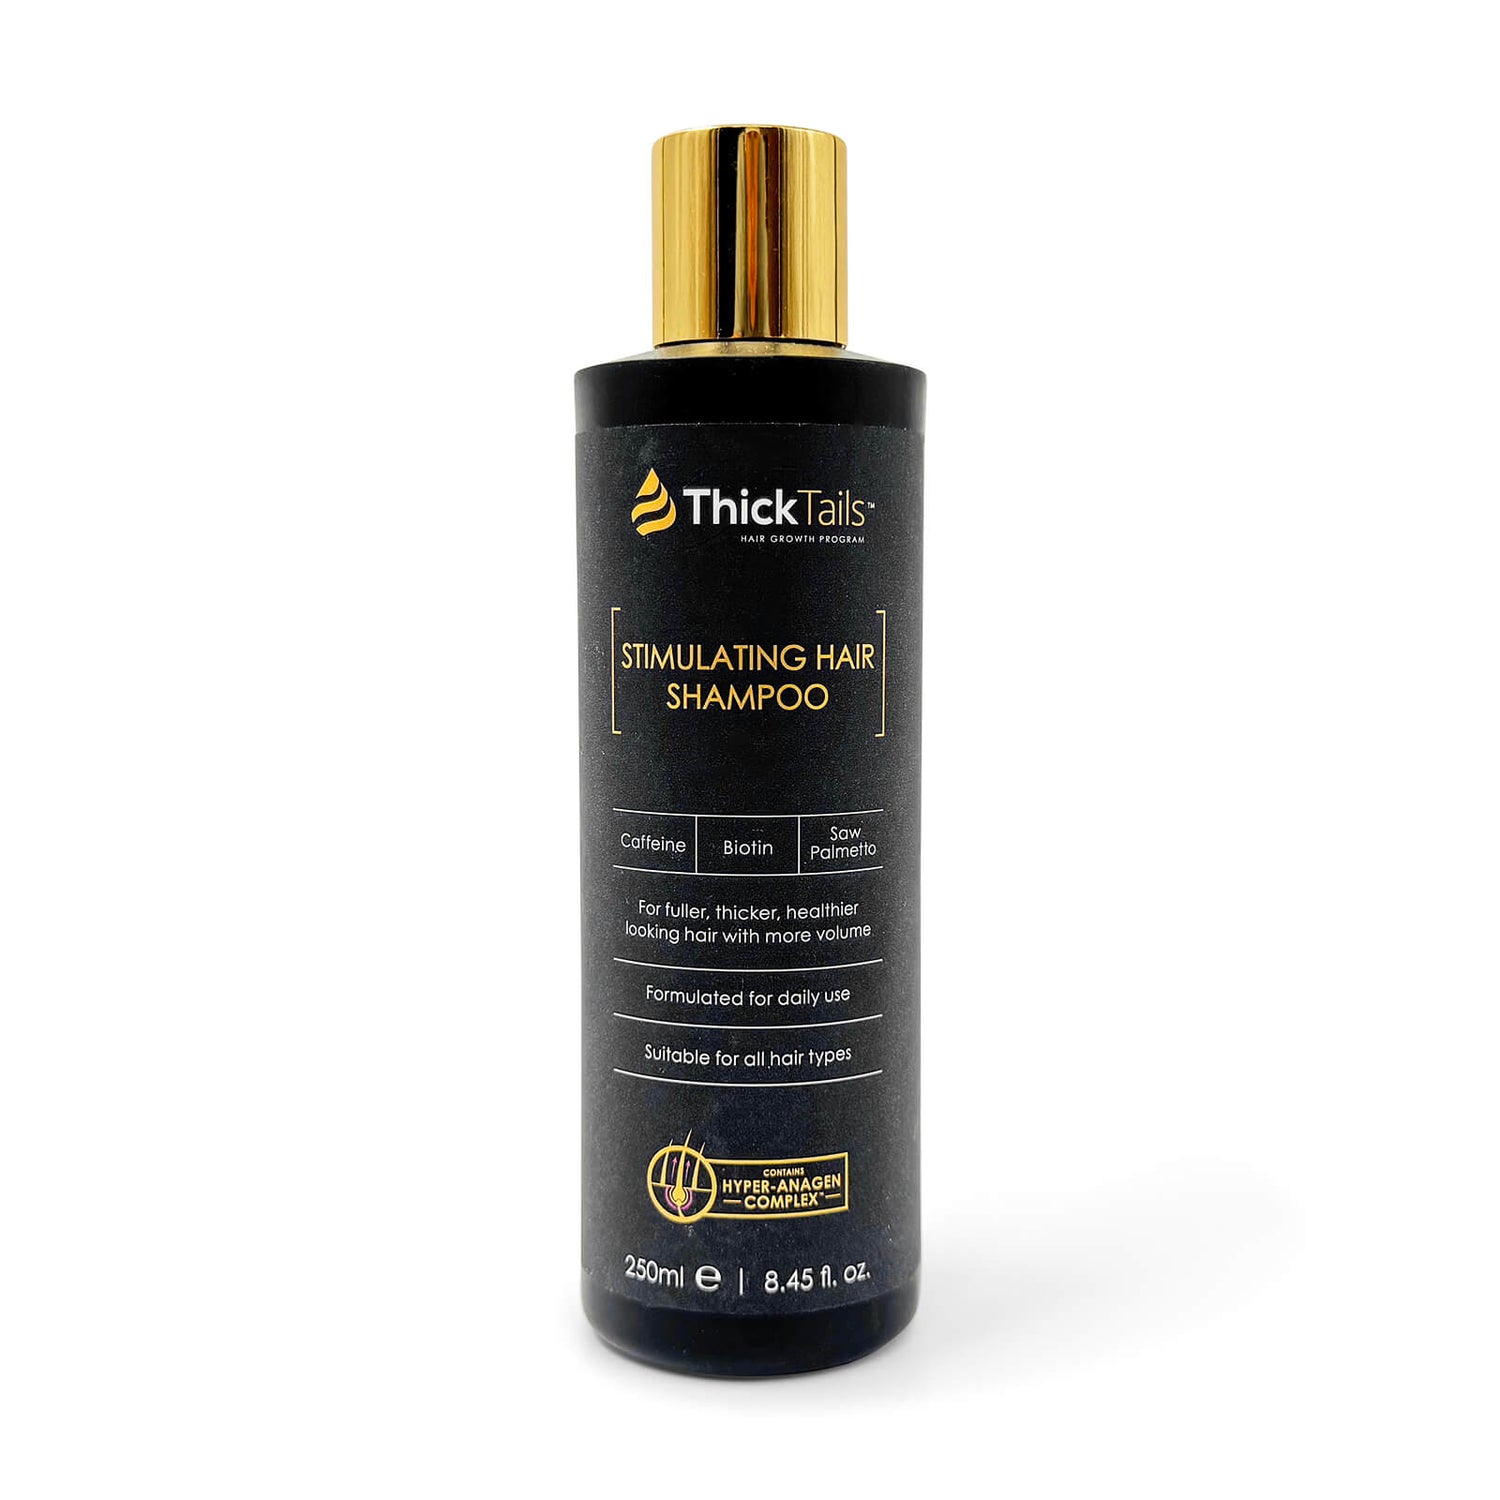 ThickTails Hair Treatment Products